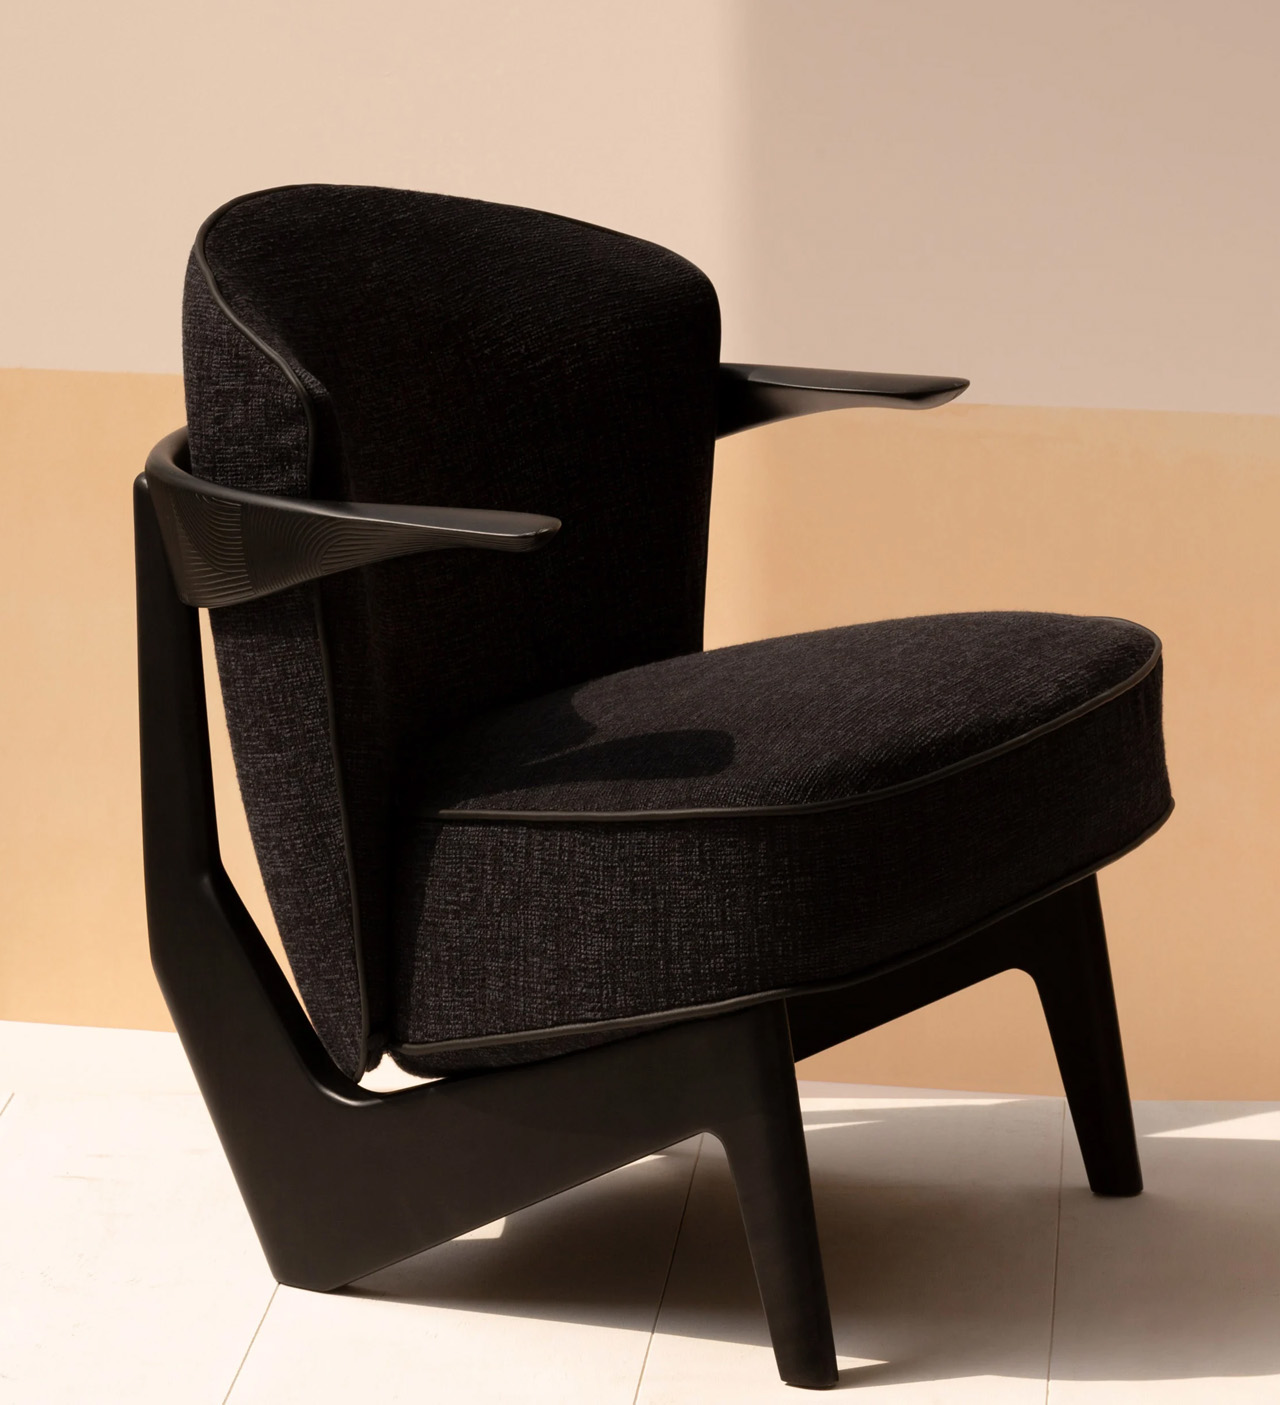 The Sova Lounge Chair is an ergonomic + comfortable chair built from sustainably sourced wood